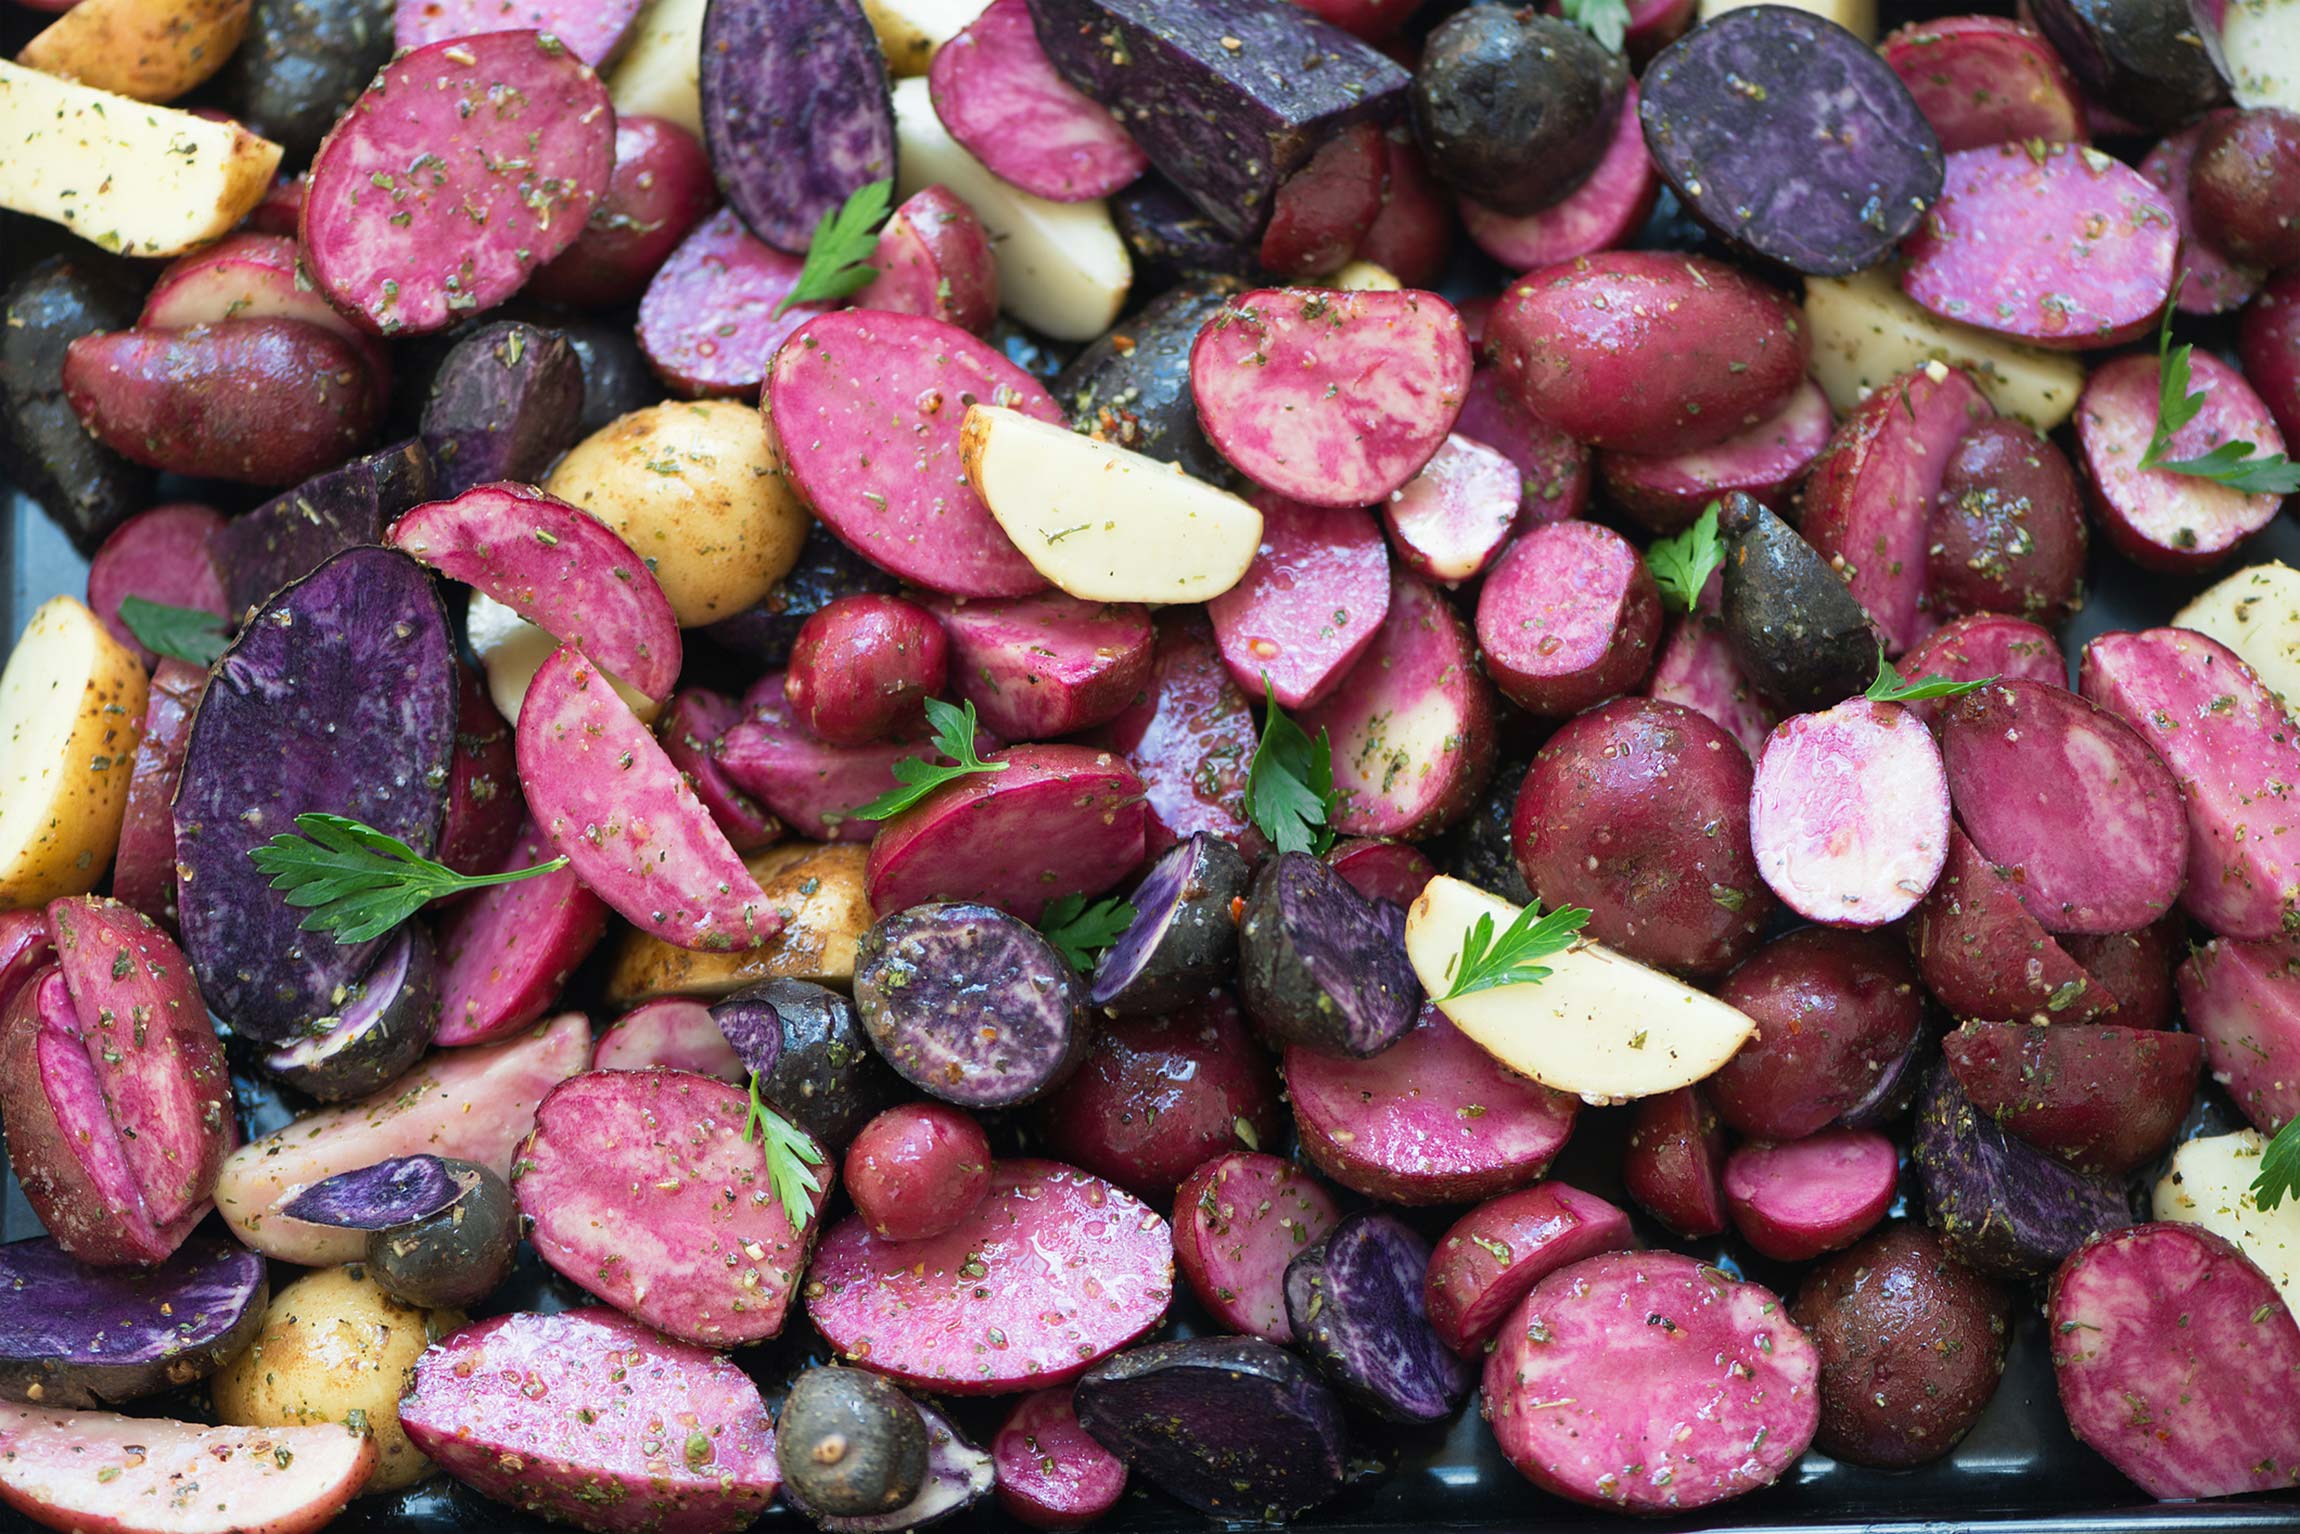 Are potatoes healthy? Discover the health benefits of different potato varieties.